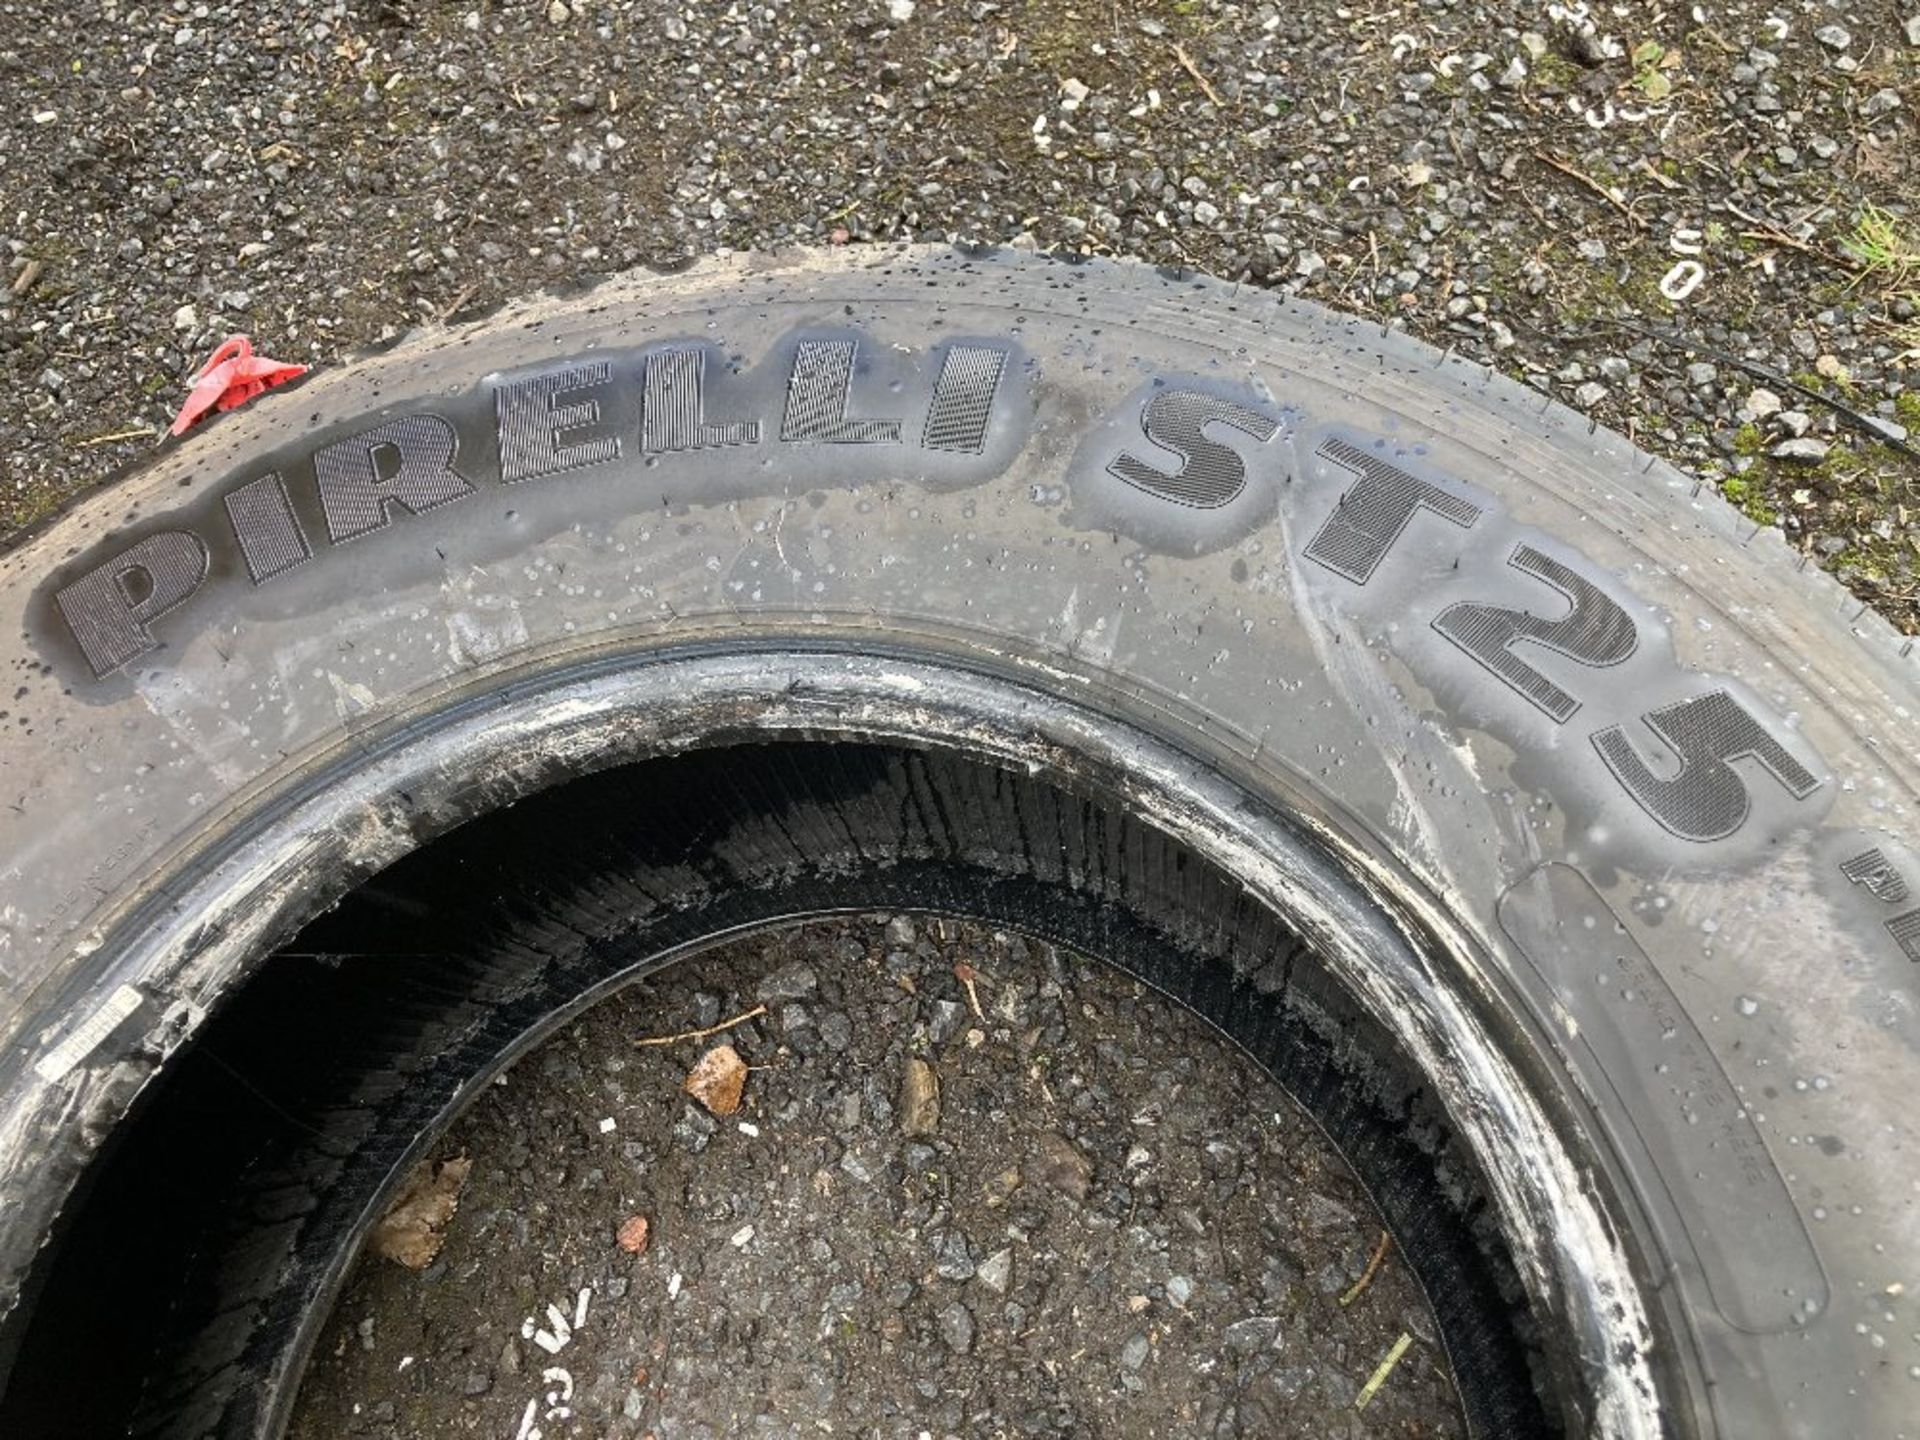 Pirelli ST25 385/65R 22.5 radial tubeless regroovable HGV tyre - Image 3 of 6